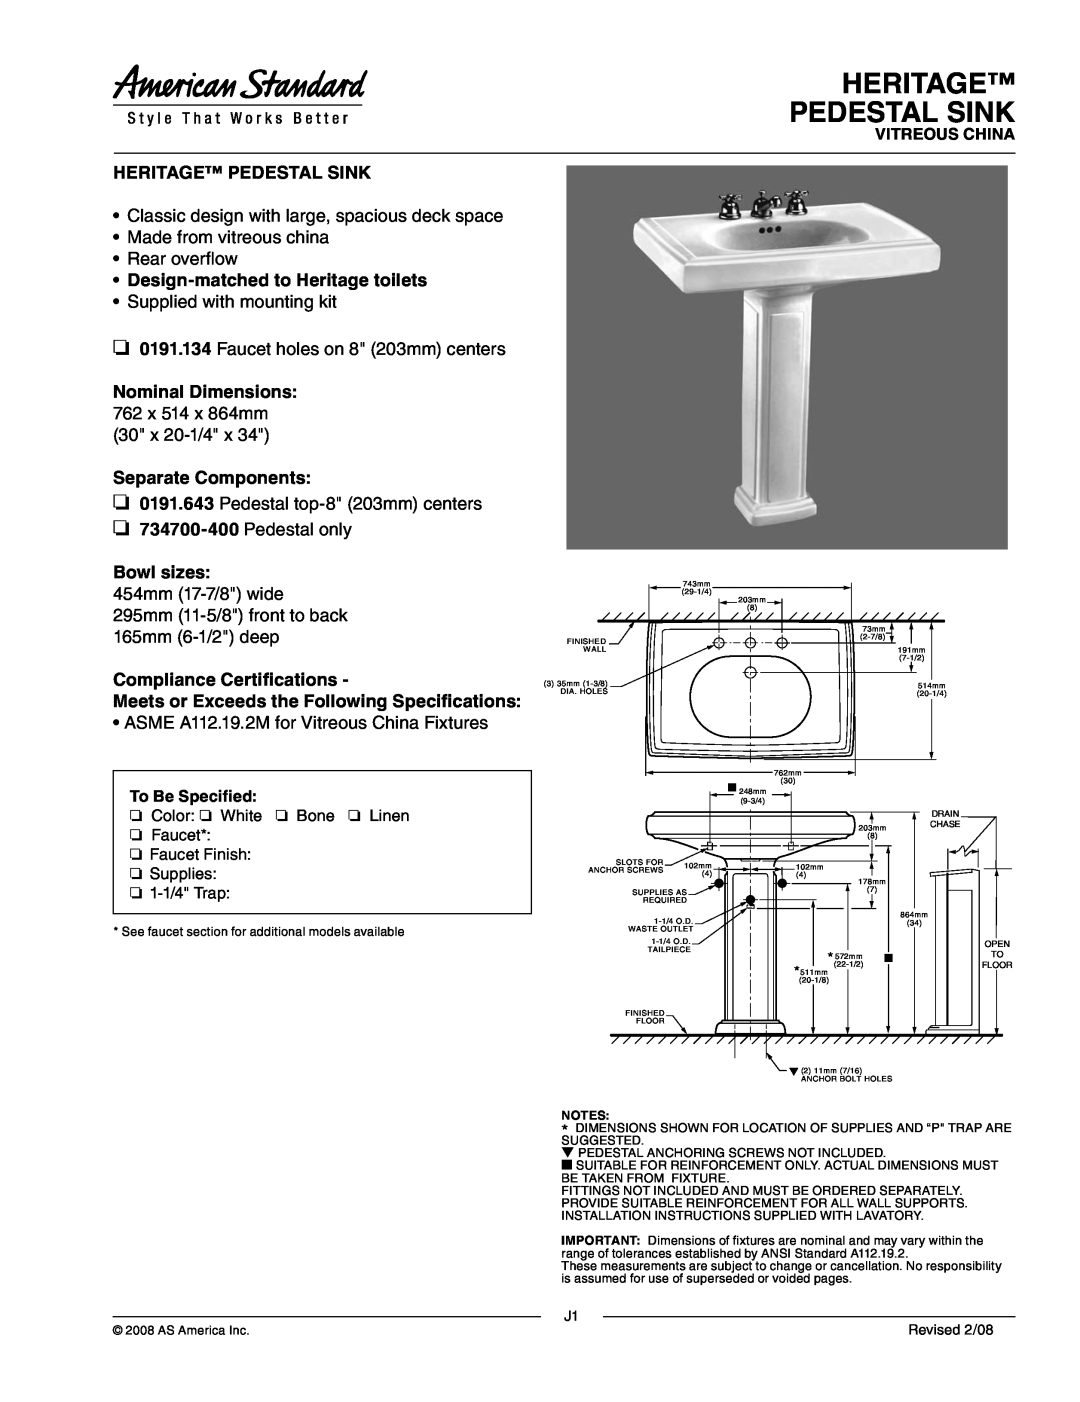 American Standard 0191.134 dimensions Heritage Pedestal Sink, Classic design with large, spacious deck space, Bowl sizes 